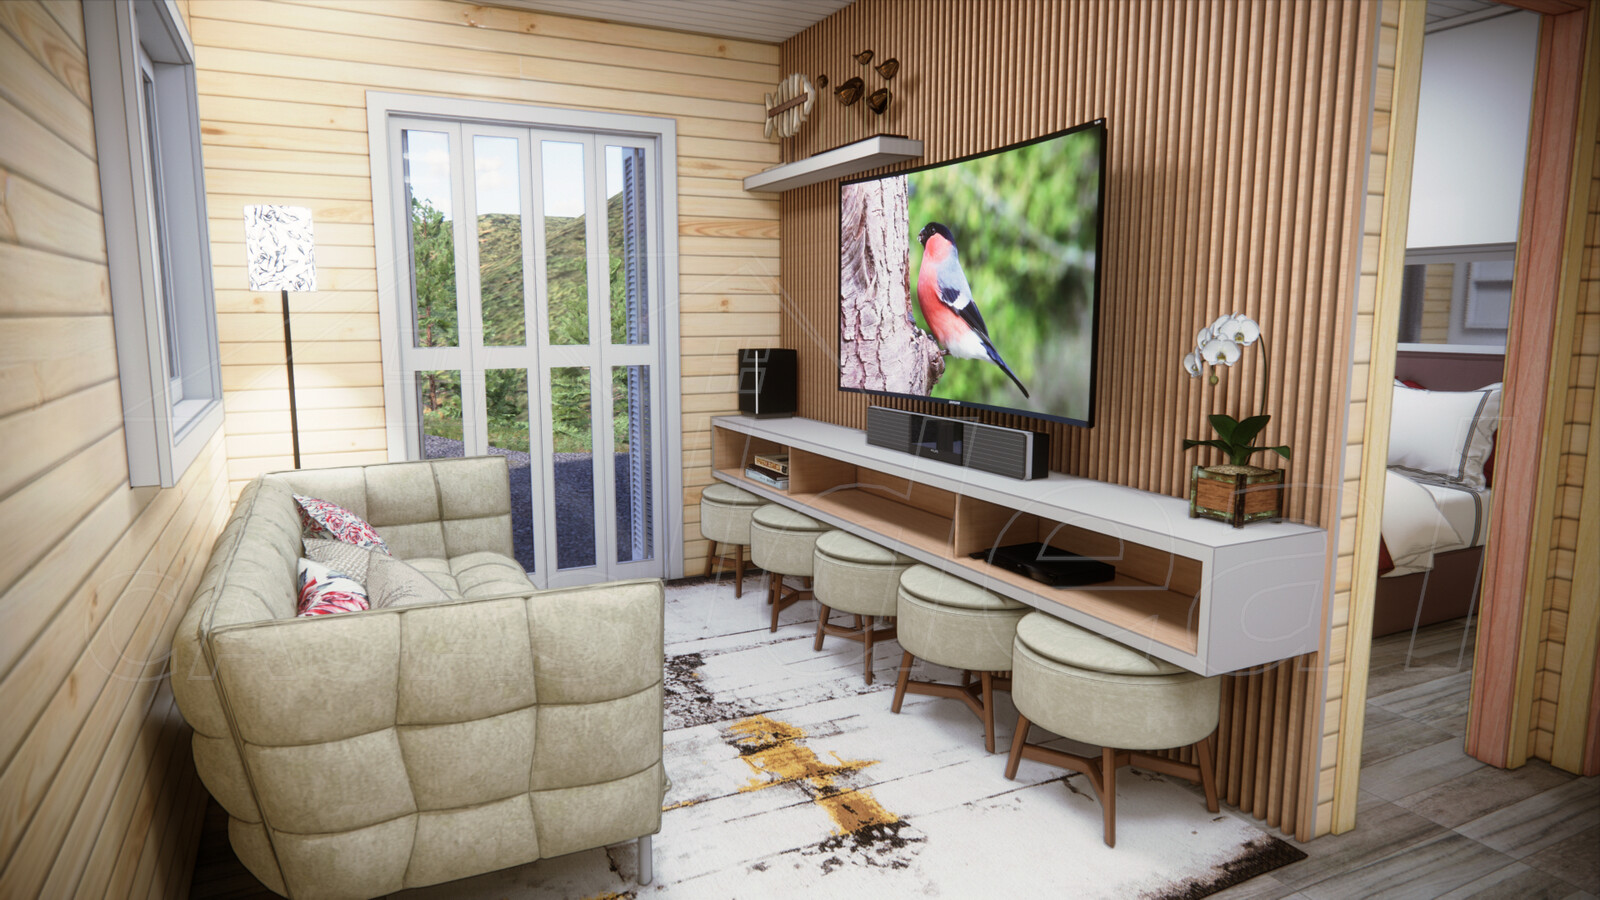 Living room and TV panel, with benches to comfortably accommodate a larger number of friends at the end of the week.